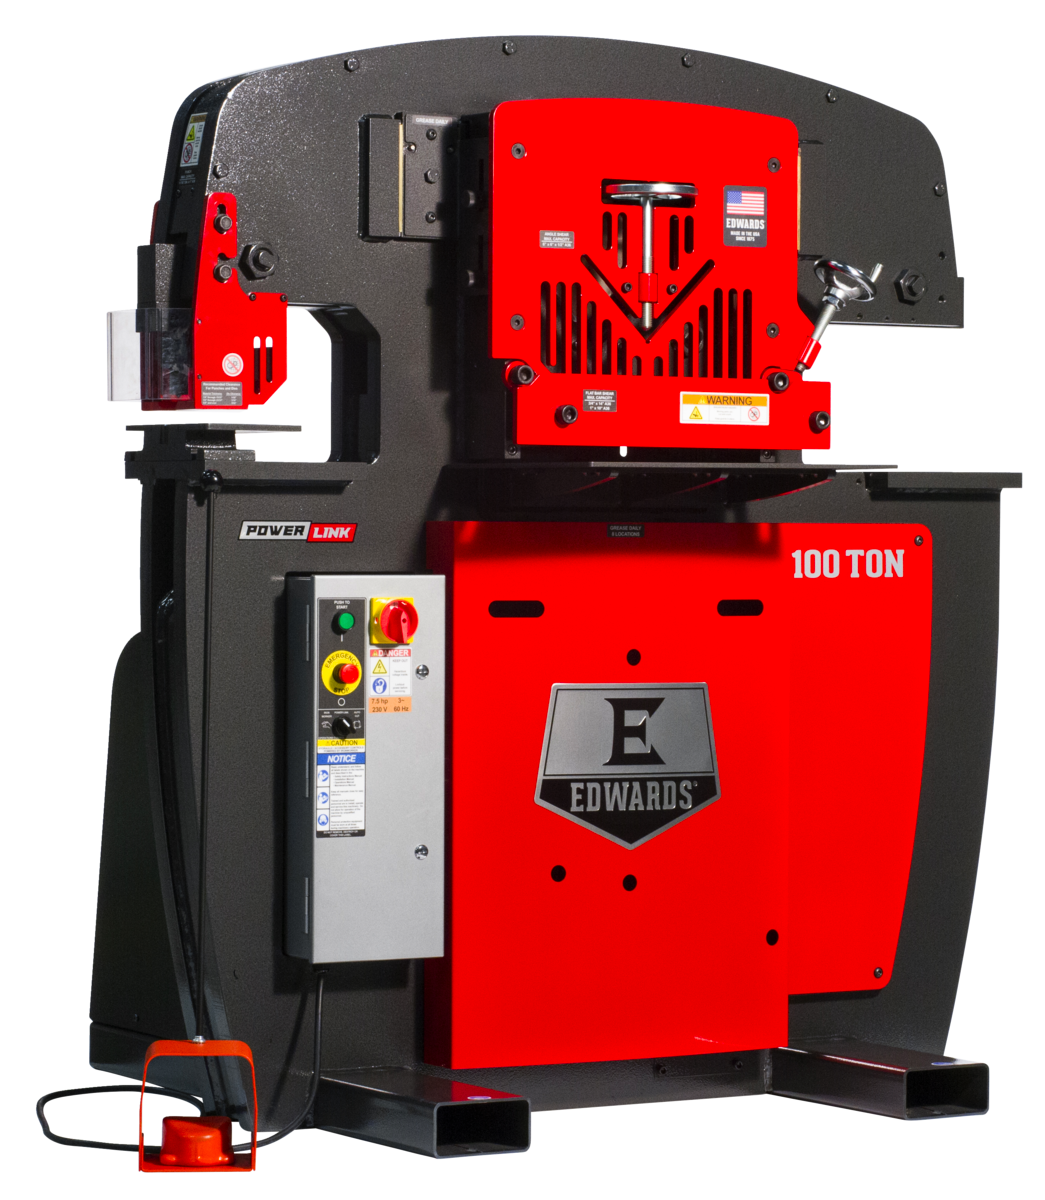 100 Ton Ironworker Int'l - 3 Ph, 380 V, 50 Hz with PowerLink